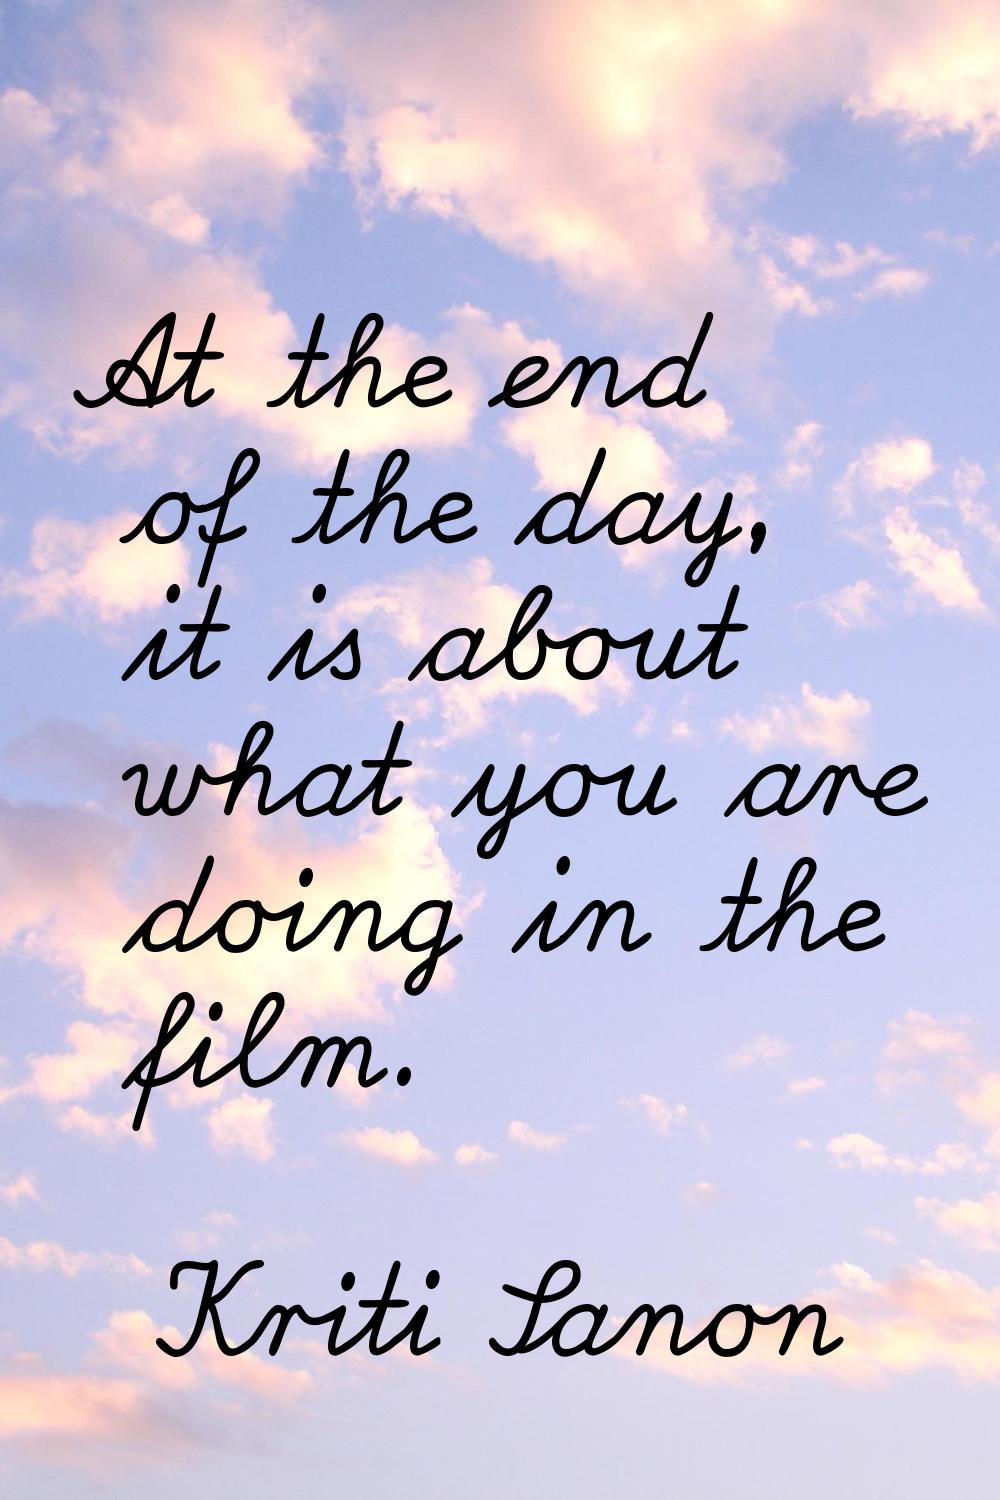 At the end of the day, it is about what you are doing in the film.